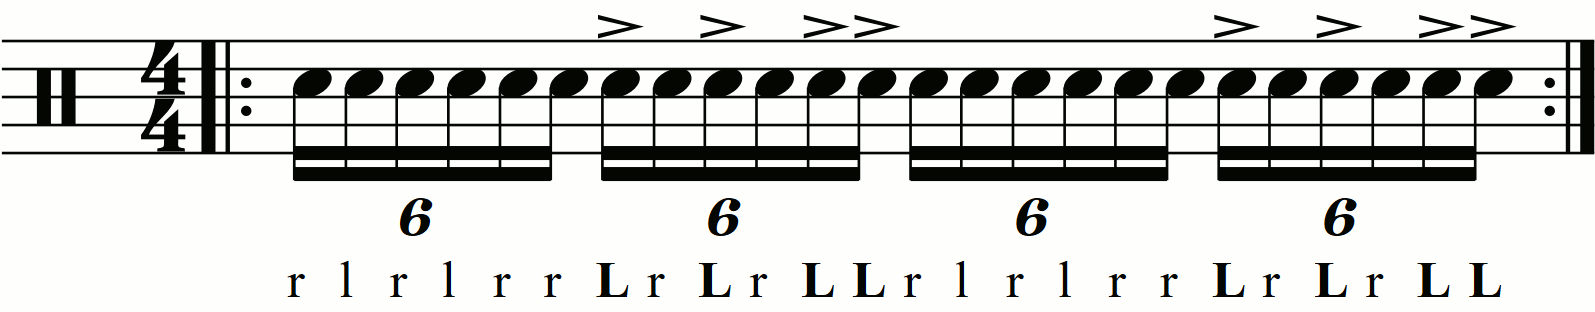 Accenting left hands in a double paradiddle